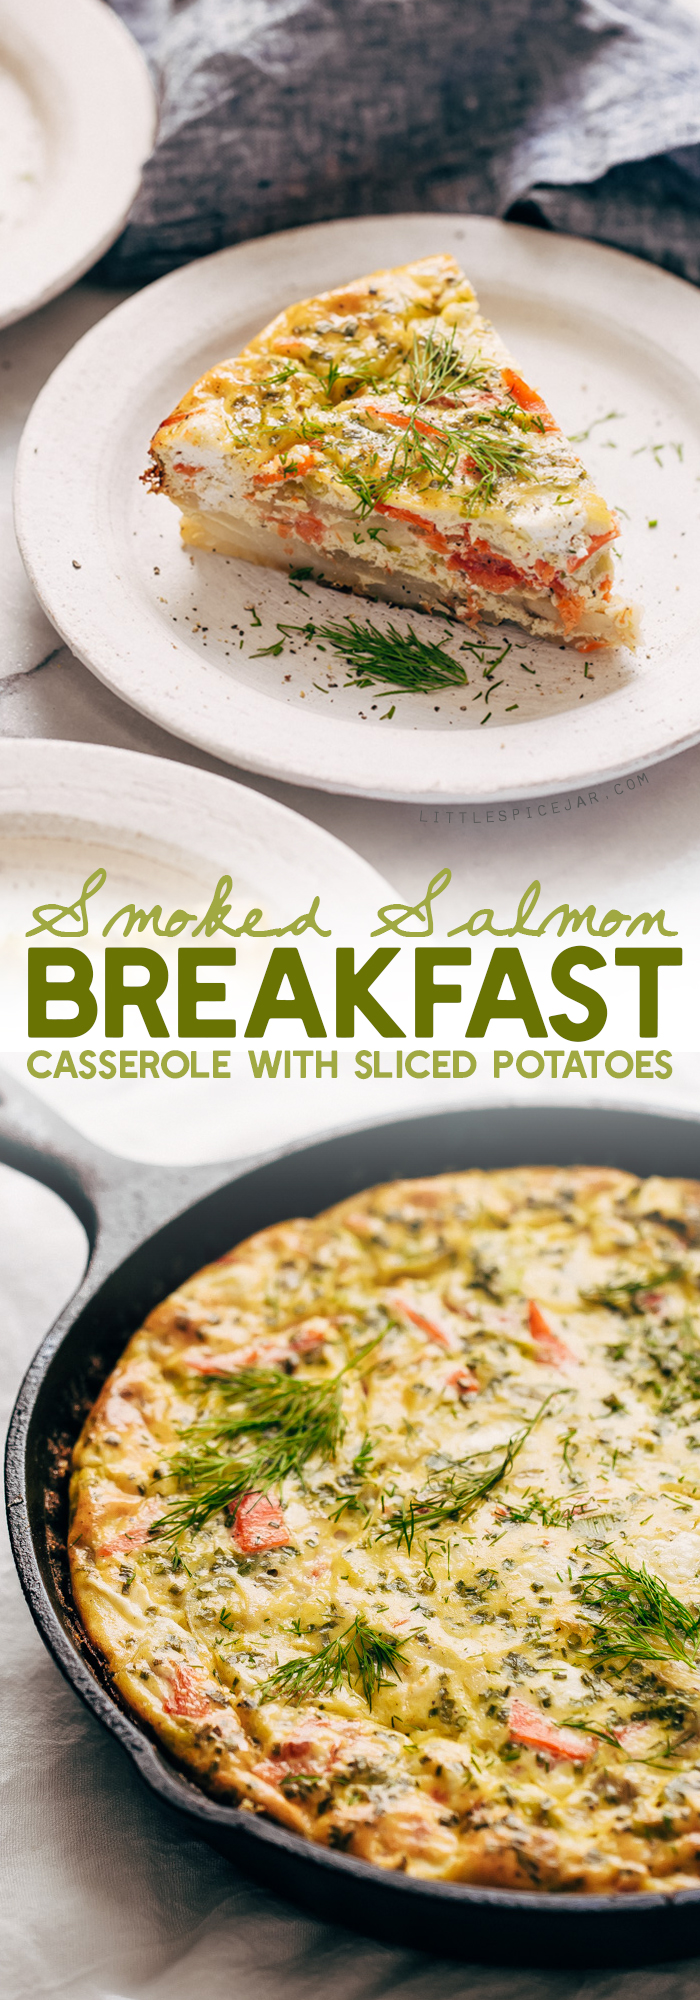 Smoked Salmon Breakfast Casserole - layers of thinly sliced potatoes, sautéed leeks, and flaky salmon. Great to serve for brunch! casserole #breakfastcasserole #smokedsalmon #salmoncasserole | Littlespicejar.com